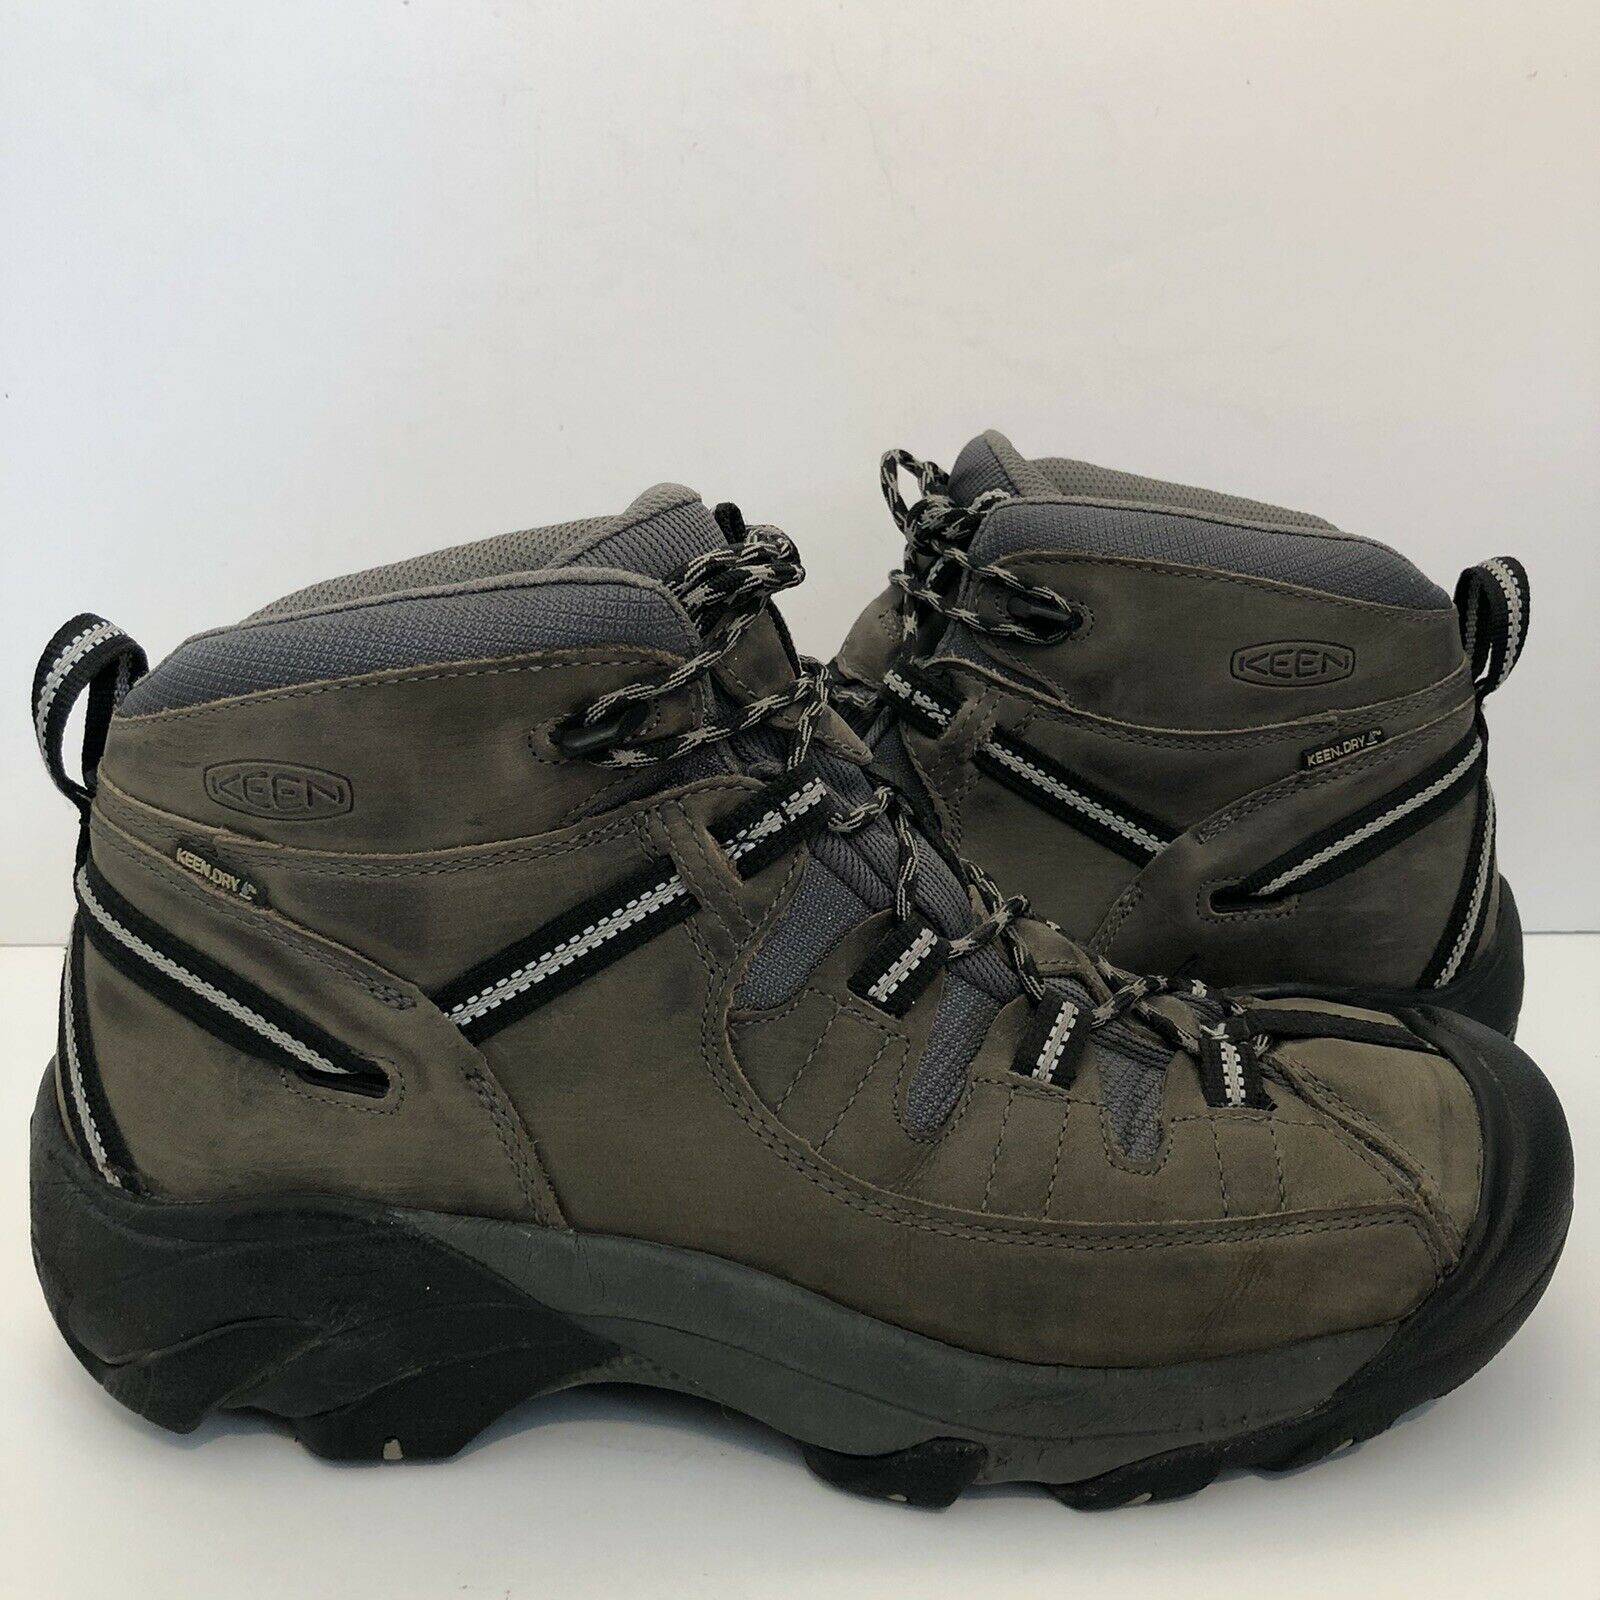 Keen Dry Mens Targhee Boots Shoes Olive Green Lace Sz11.5Trail Hiking Waterproof